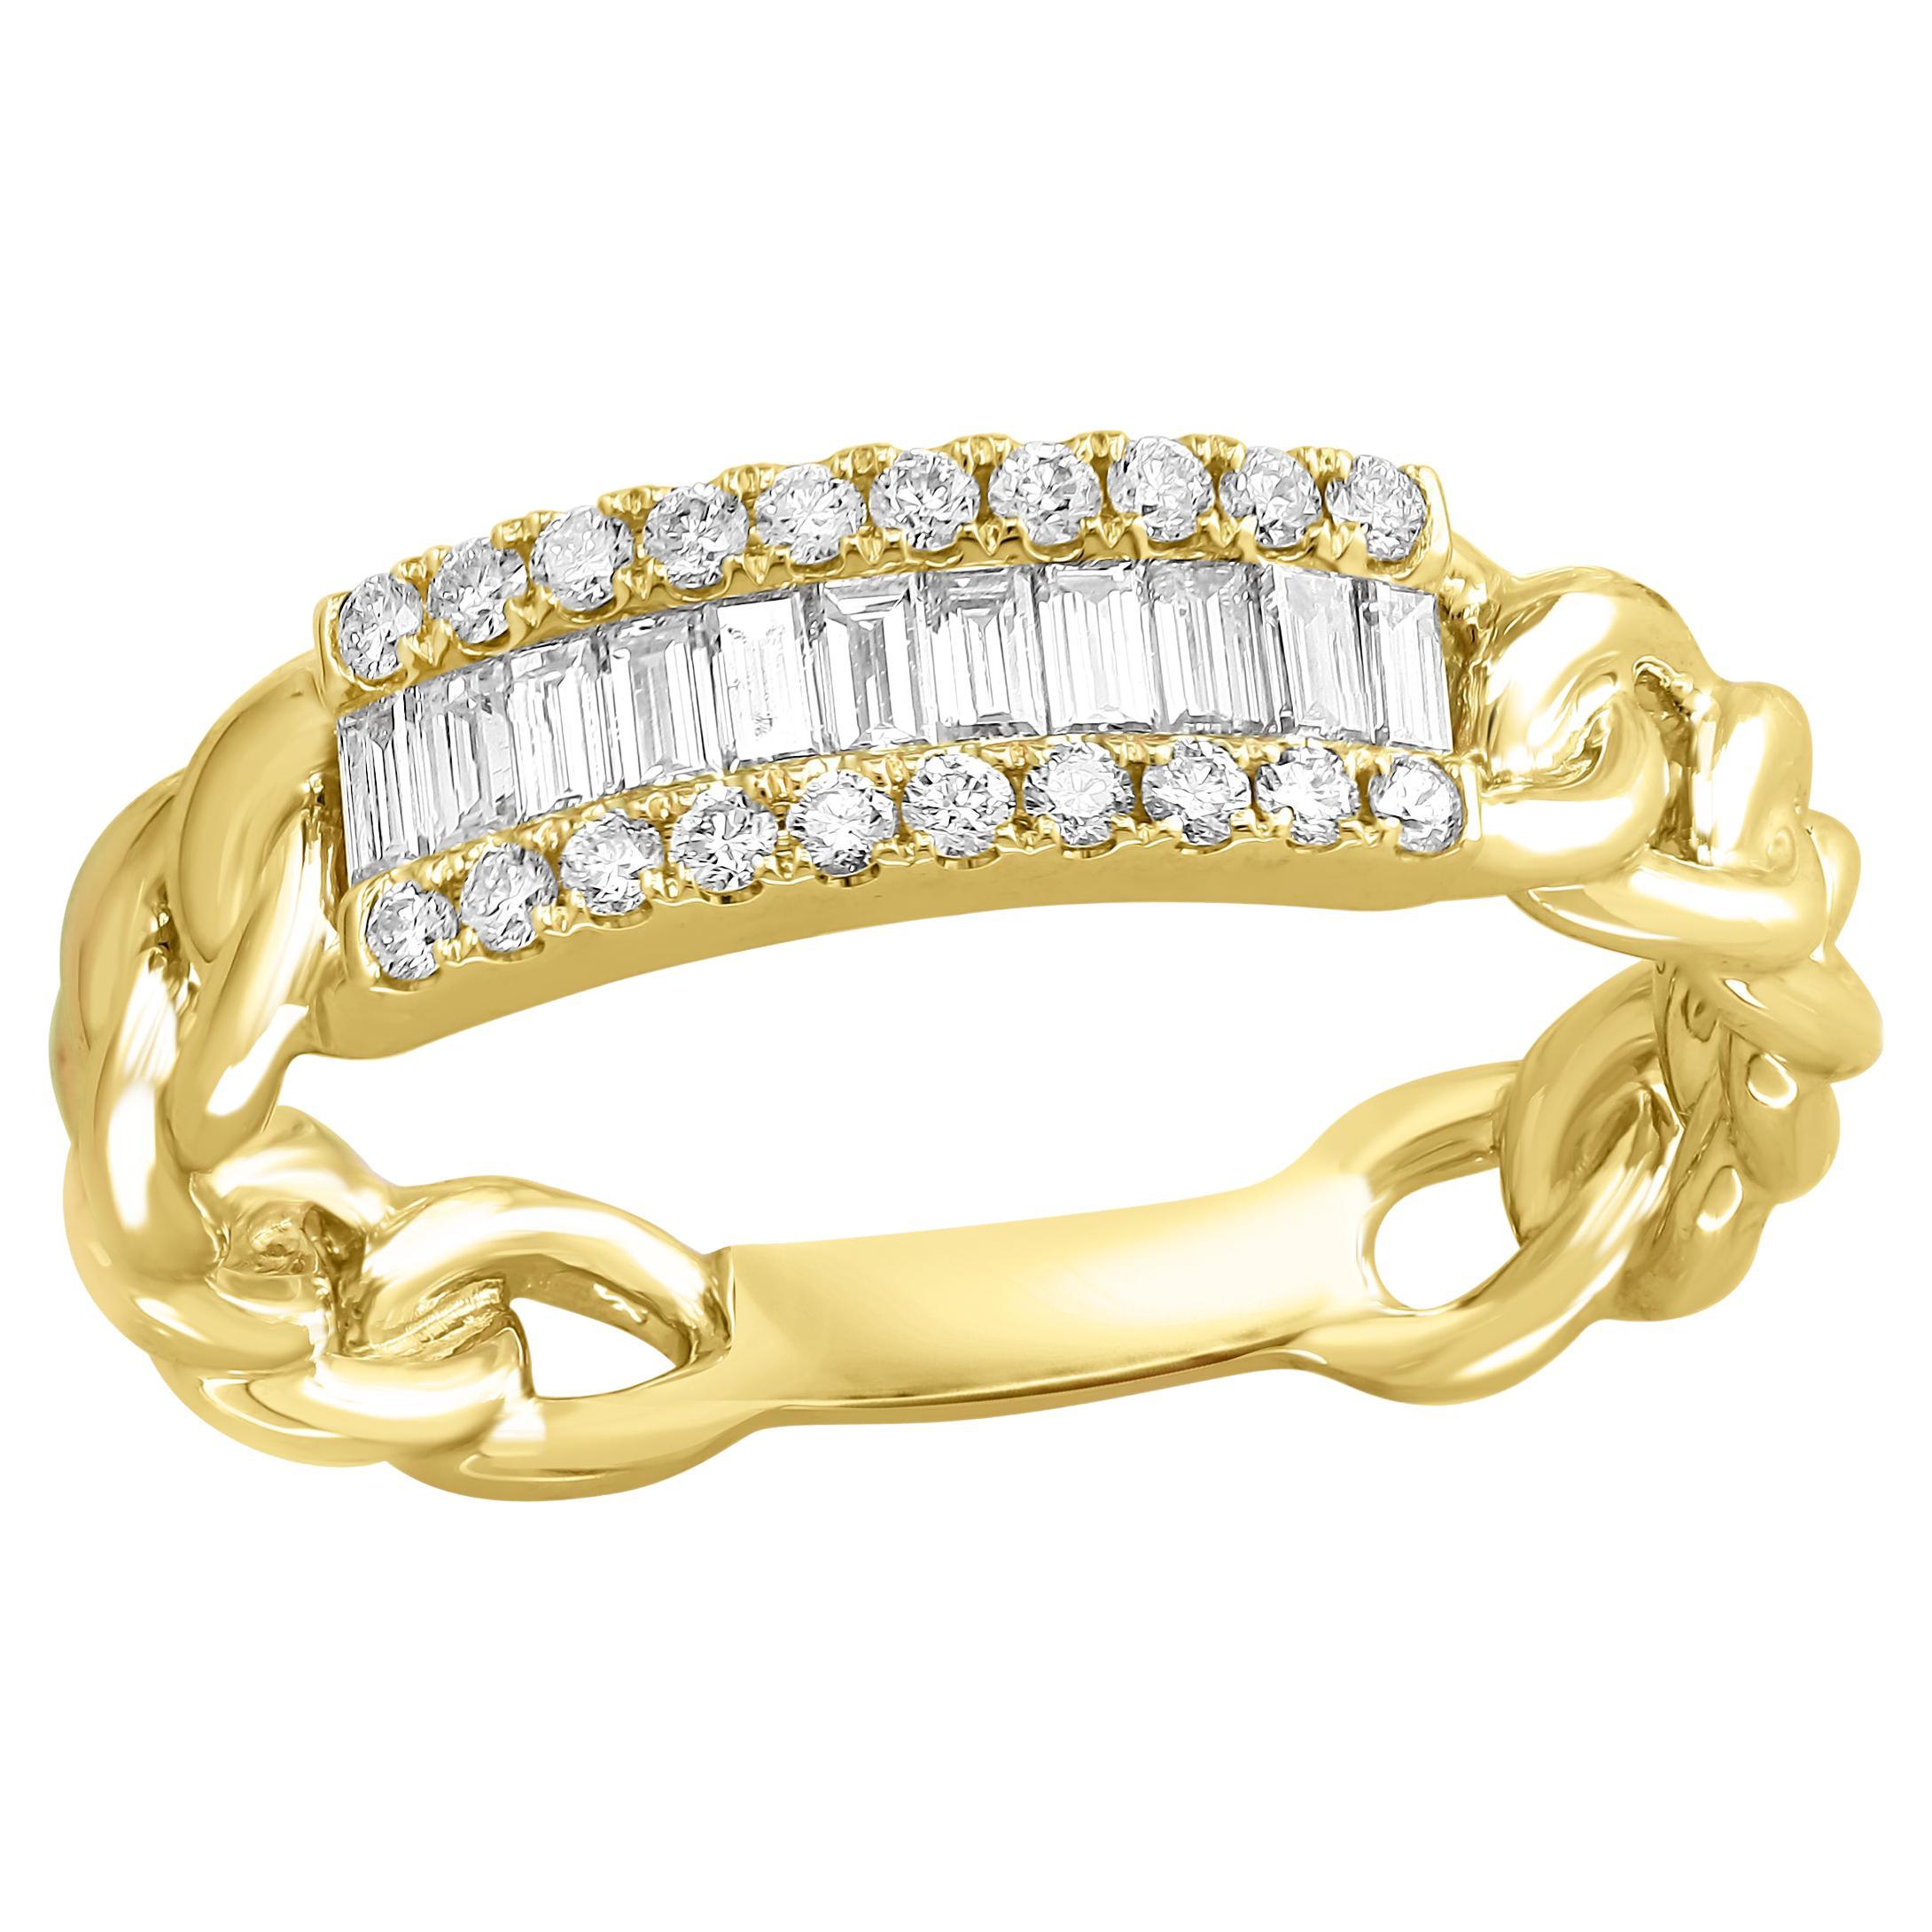 0.41 Carat Baguette Diamond Fashion Ring in 18K Yellow Gold For Sale